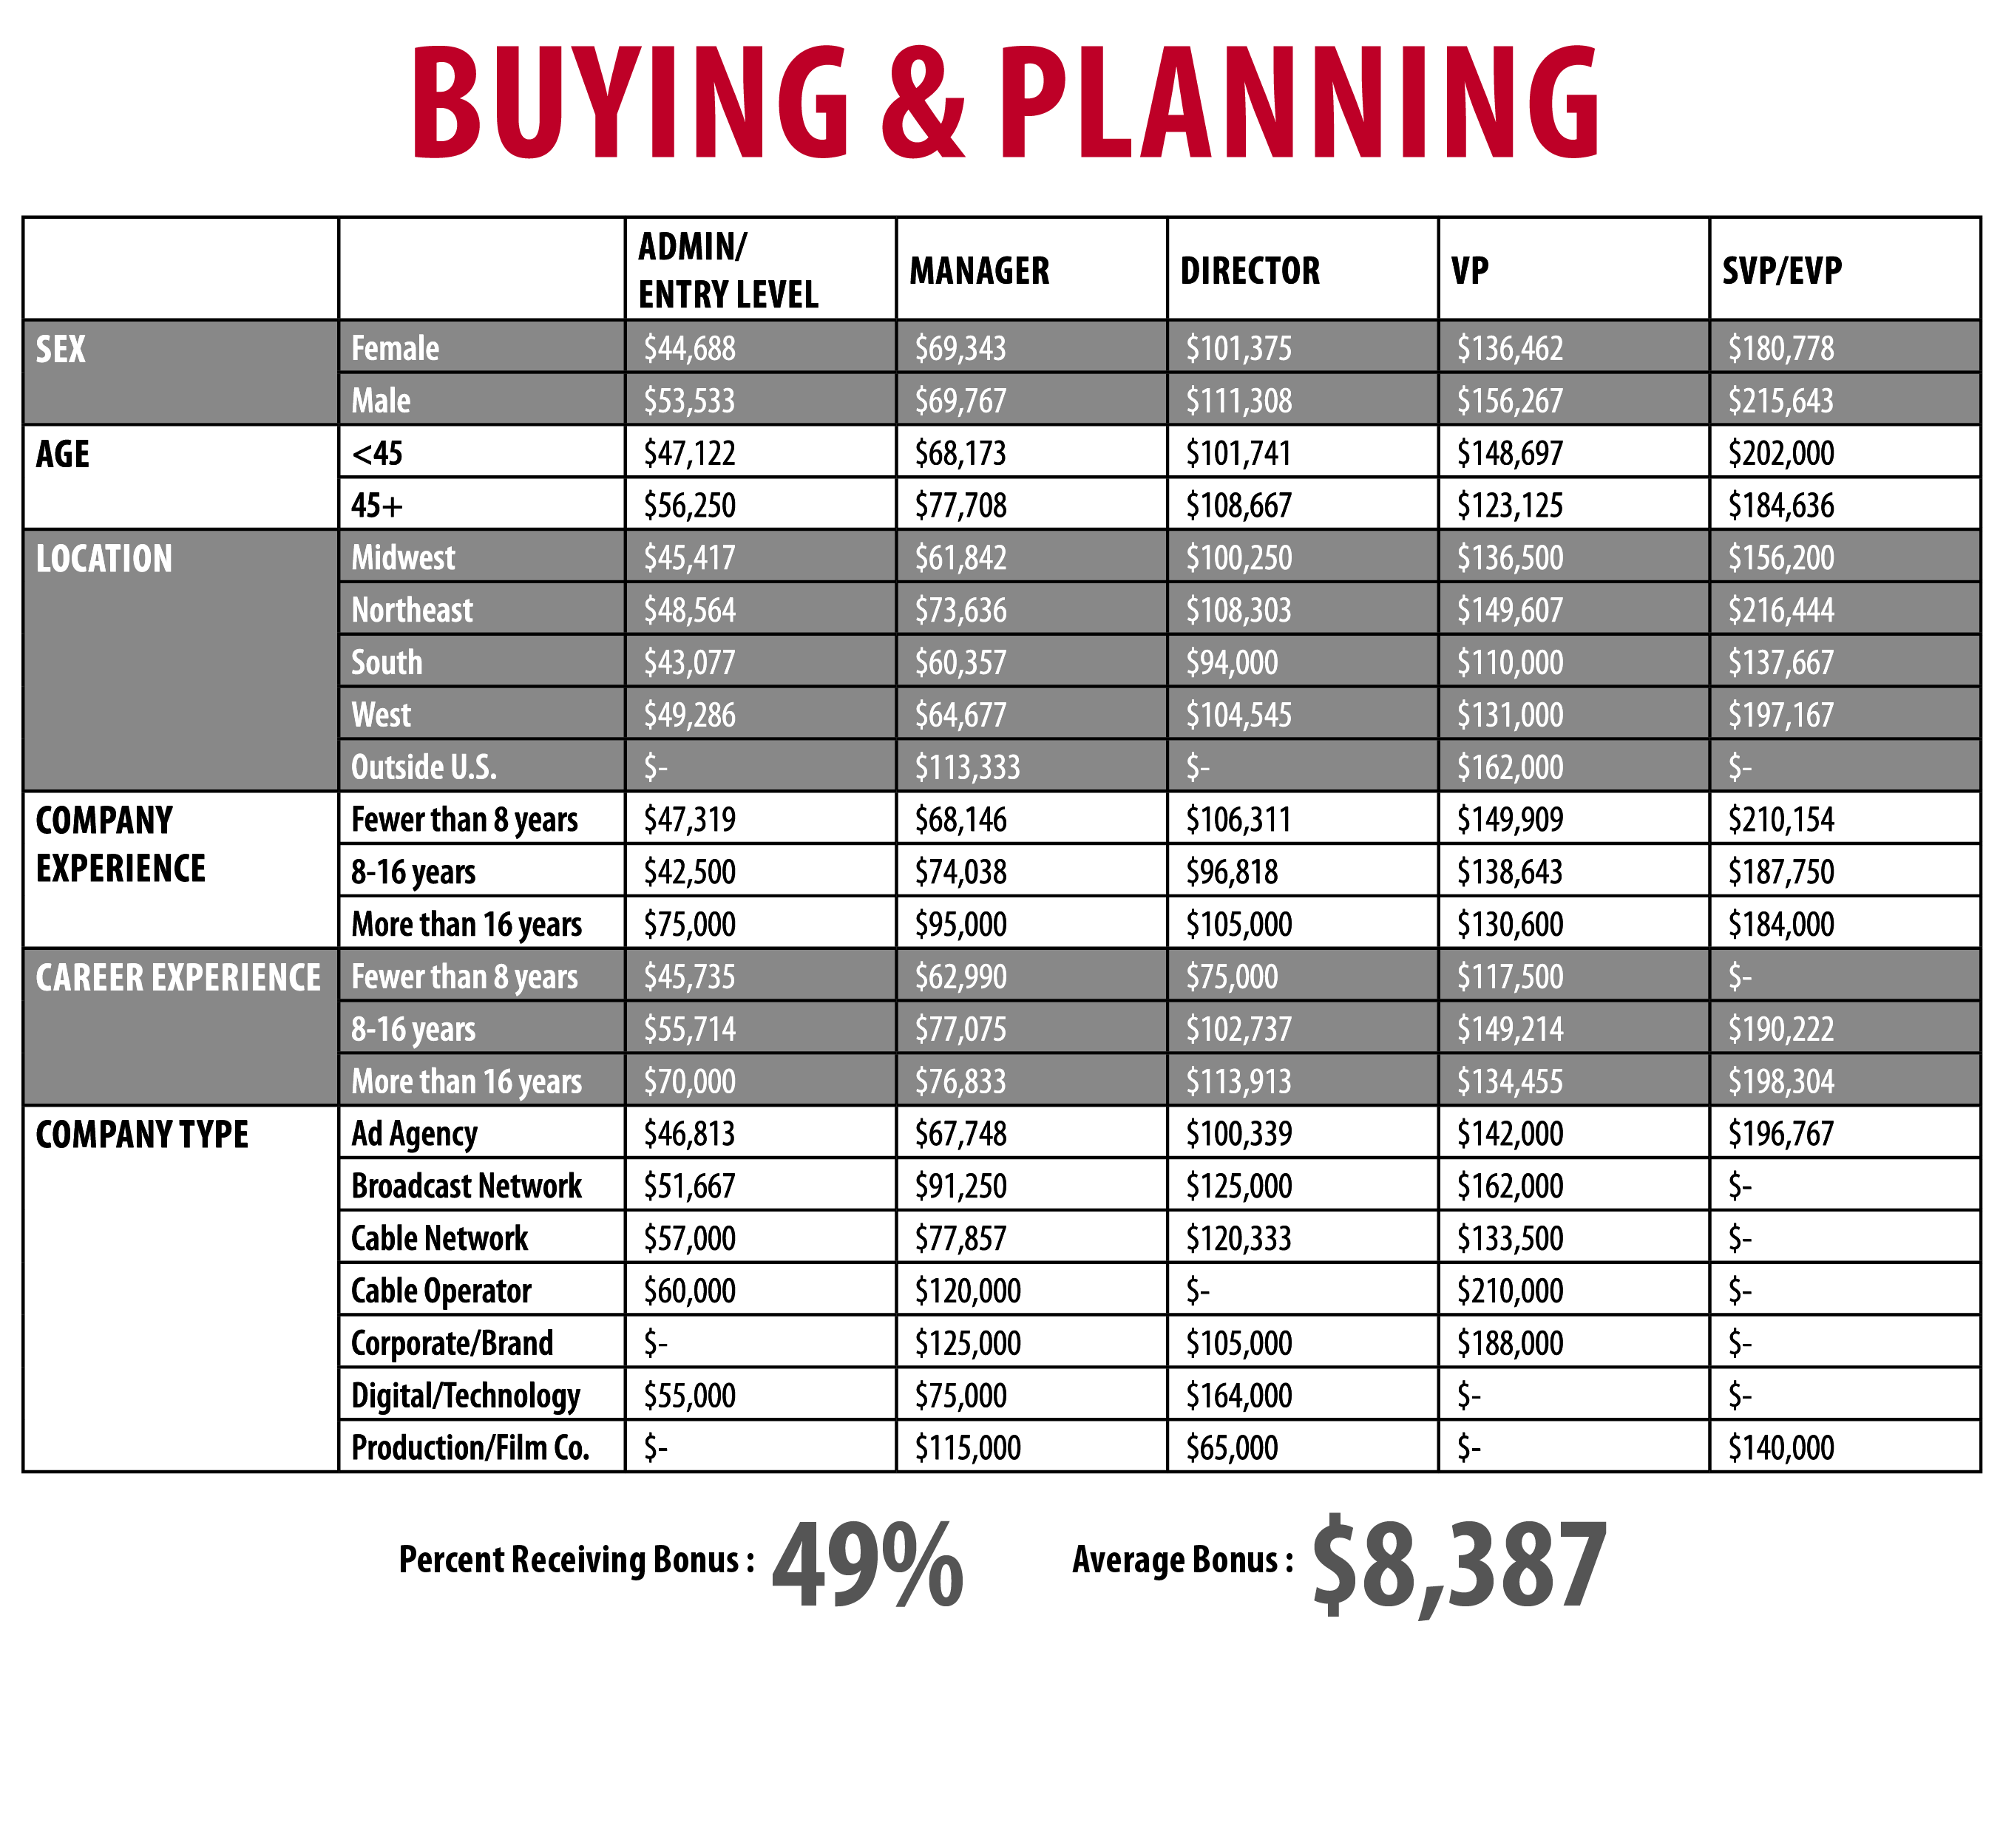 BuyingPlanning_Chart_Outlined